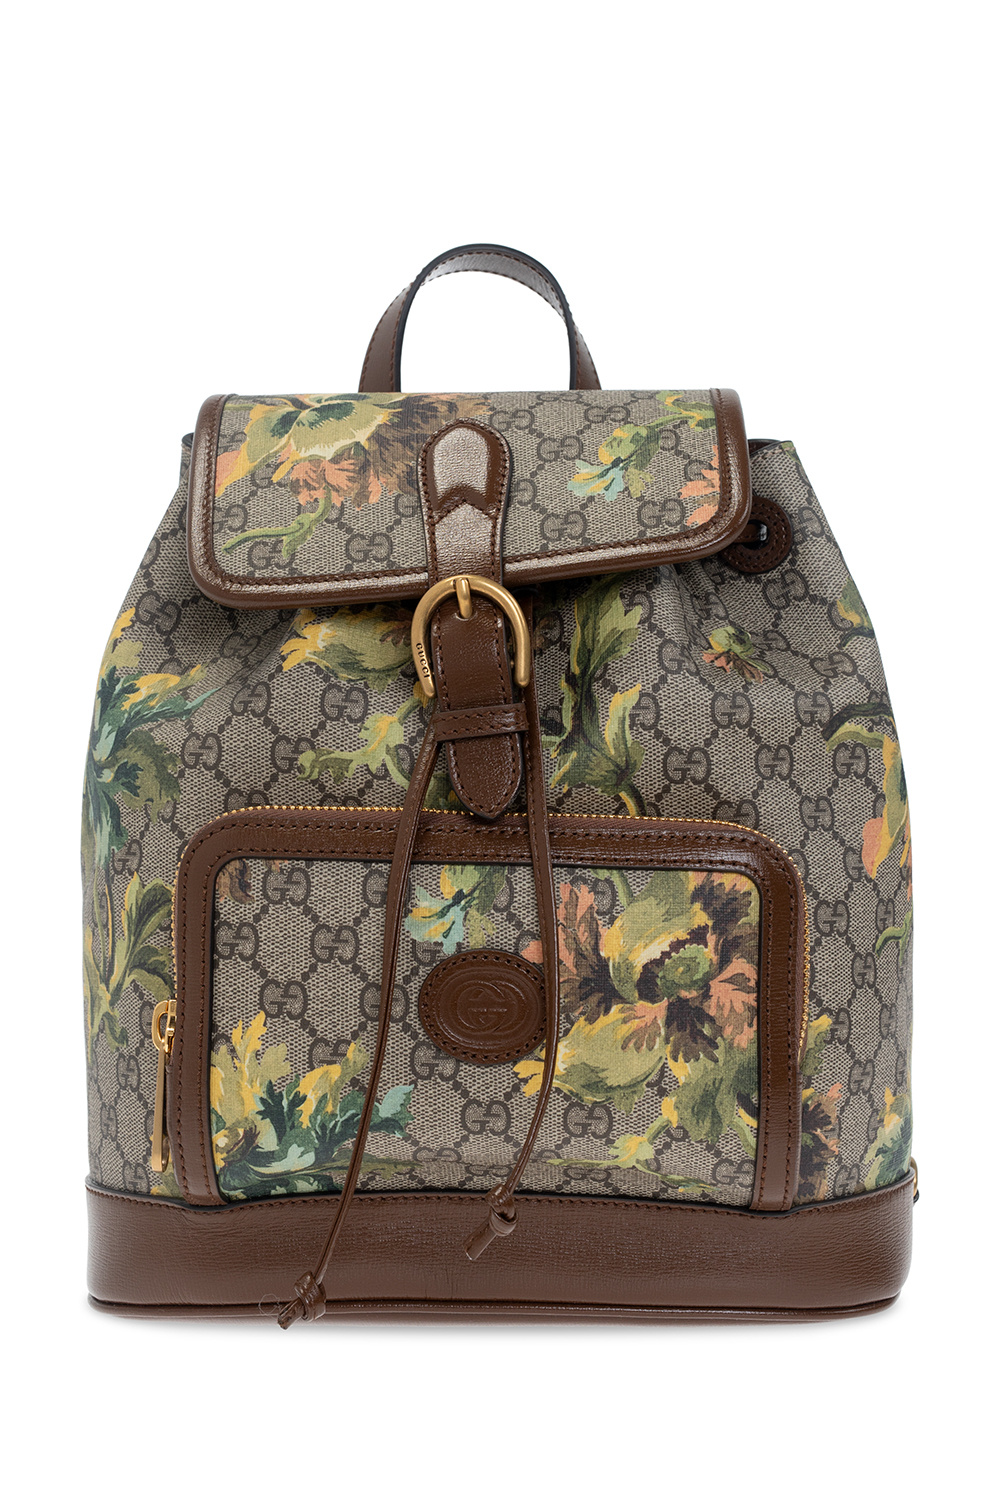 Gucci GG Canvas Backpack